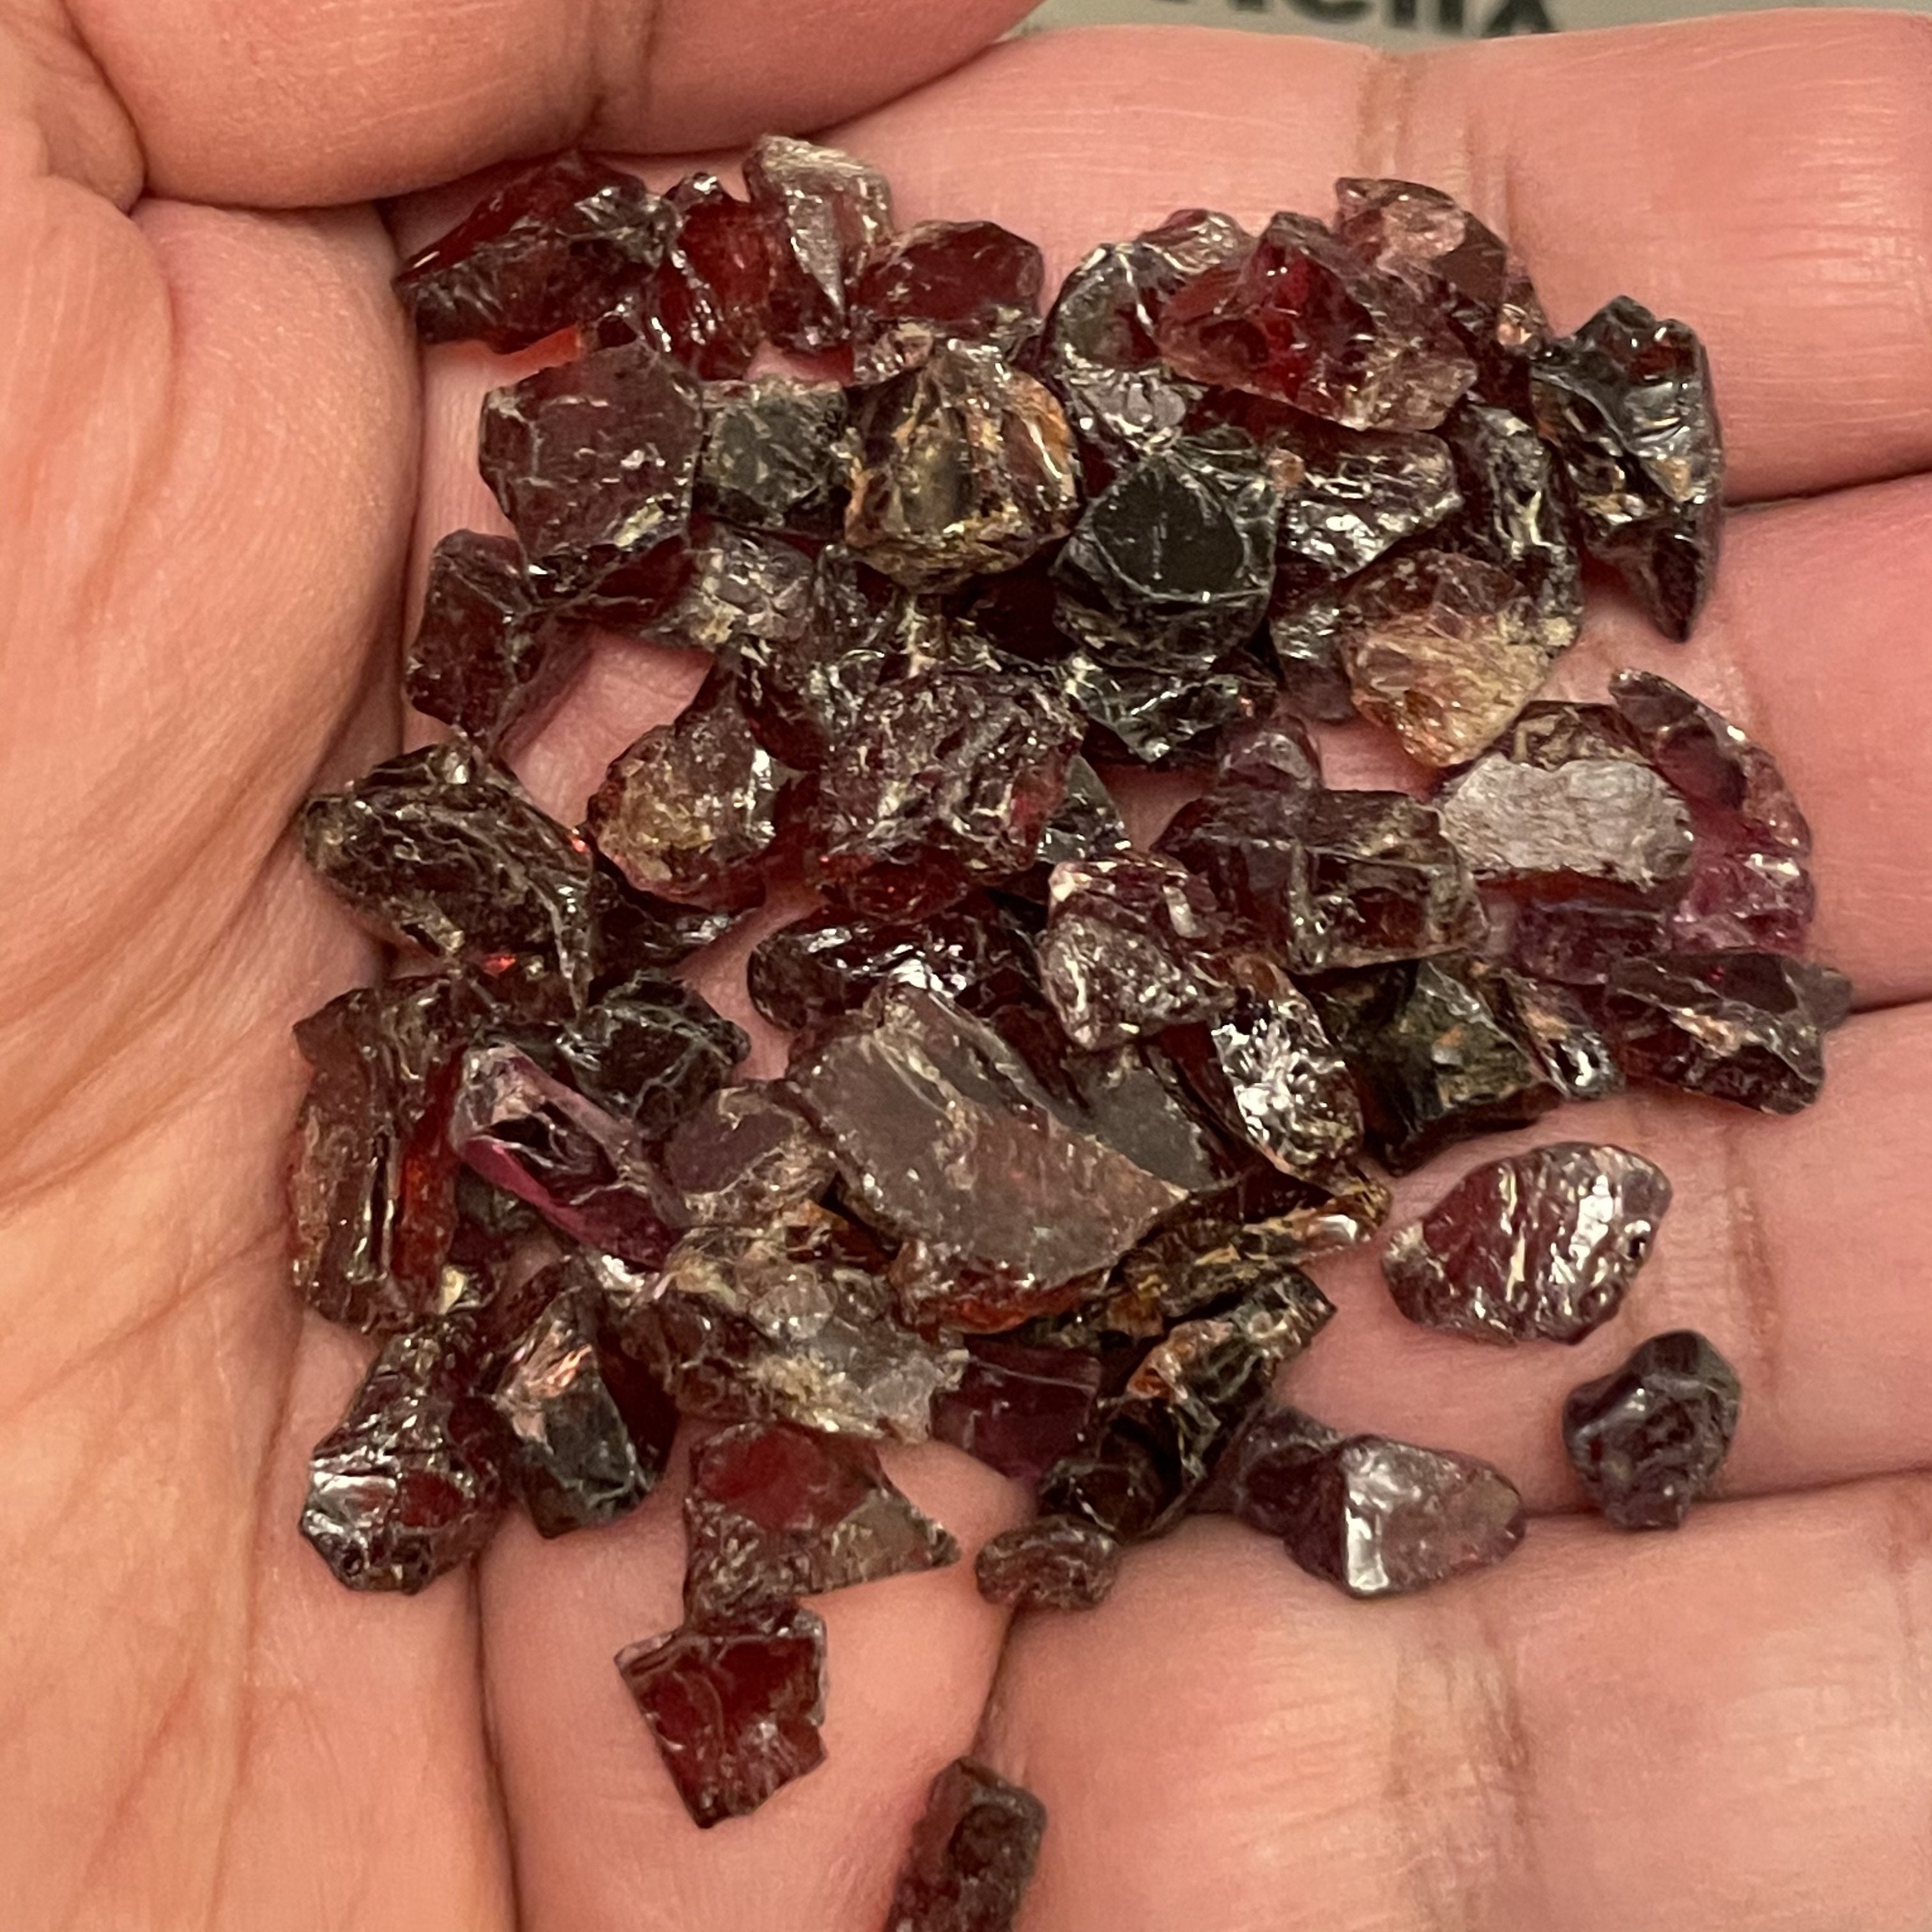 Garnets Tanzania Price Is For 1 Piece 0.5Gm - 1.8Gm Clarity Clean Vvs Vs Slightly Included Eye To